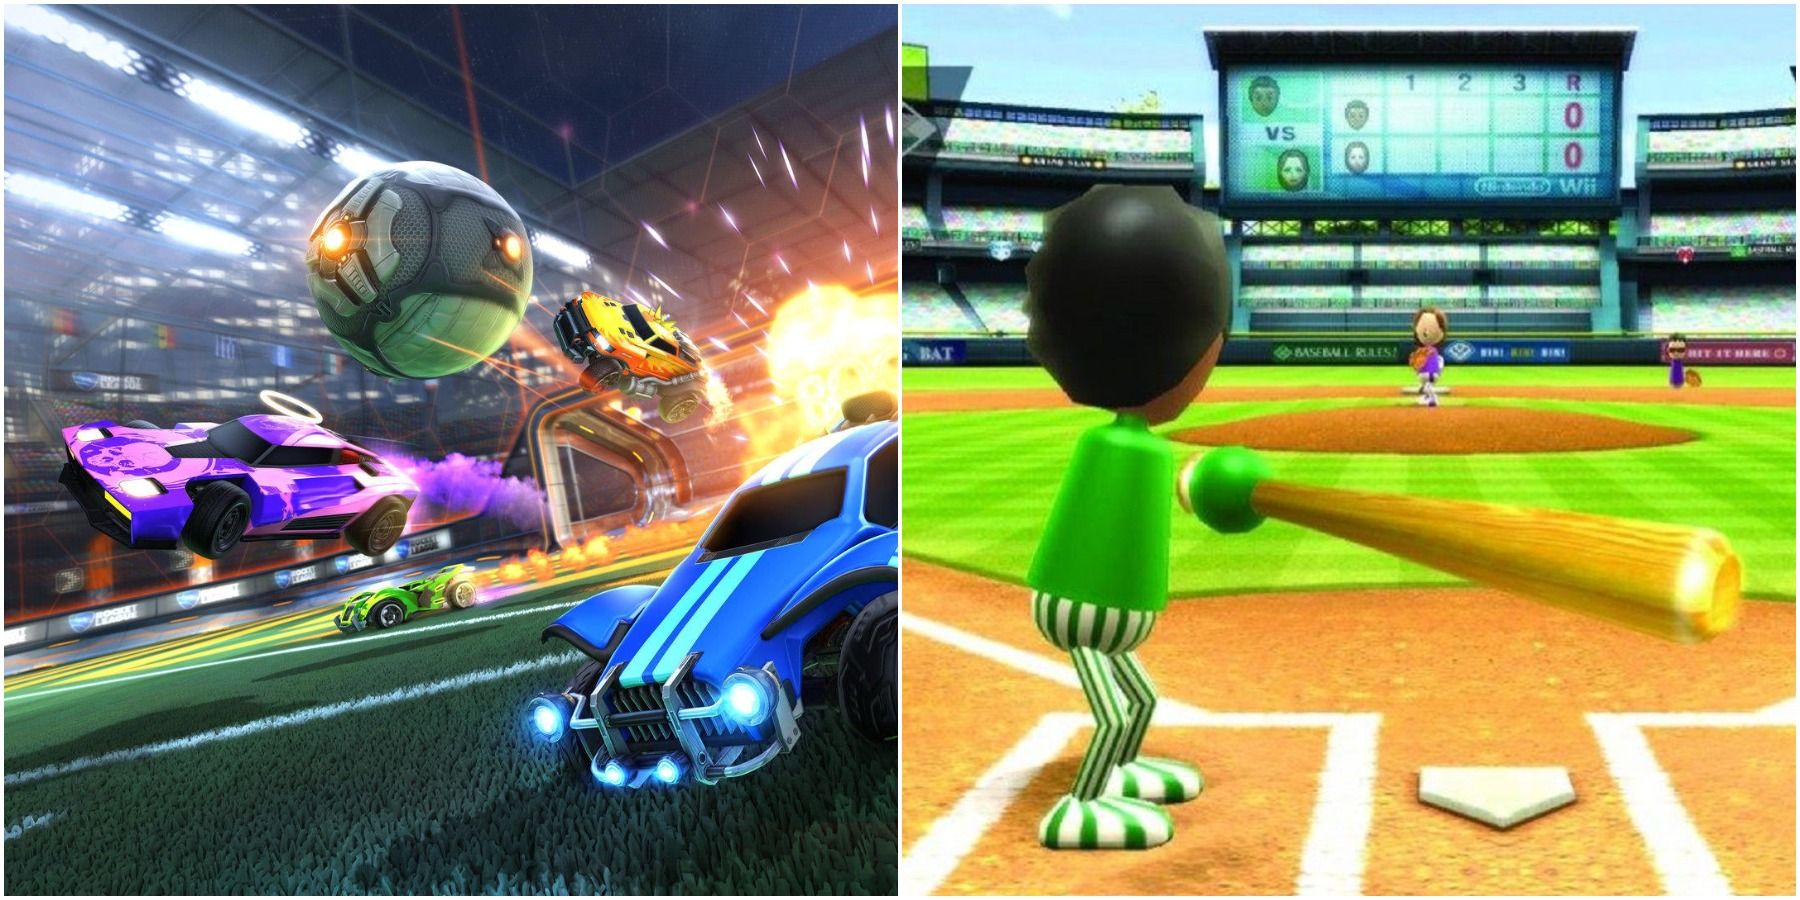 (Left) Rocket League cars chasing ball (Right) Batter at base in Wii Sports